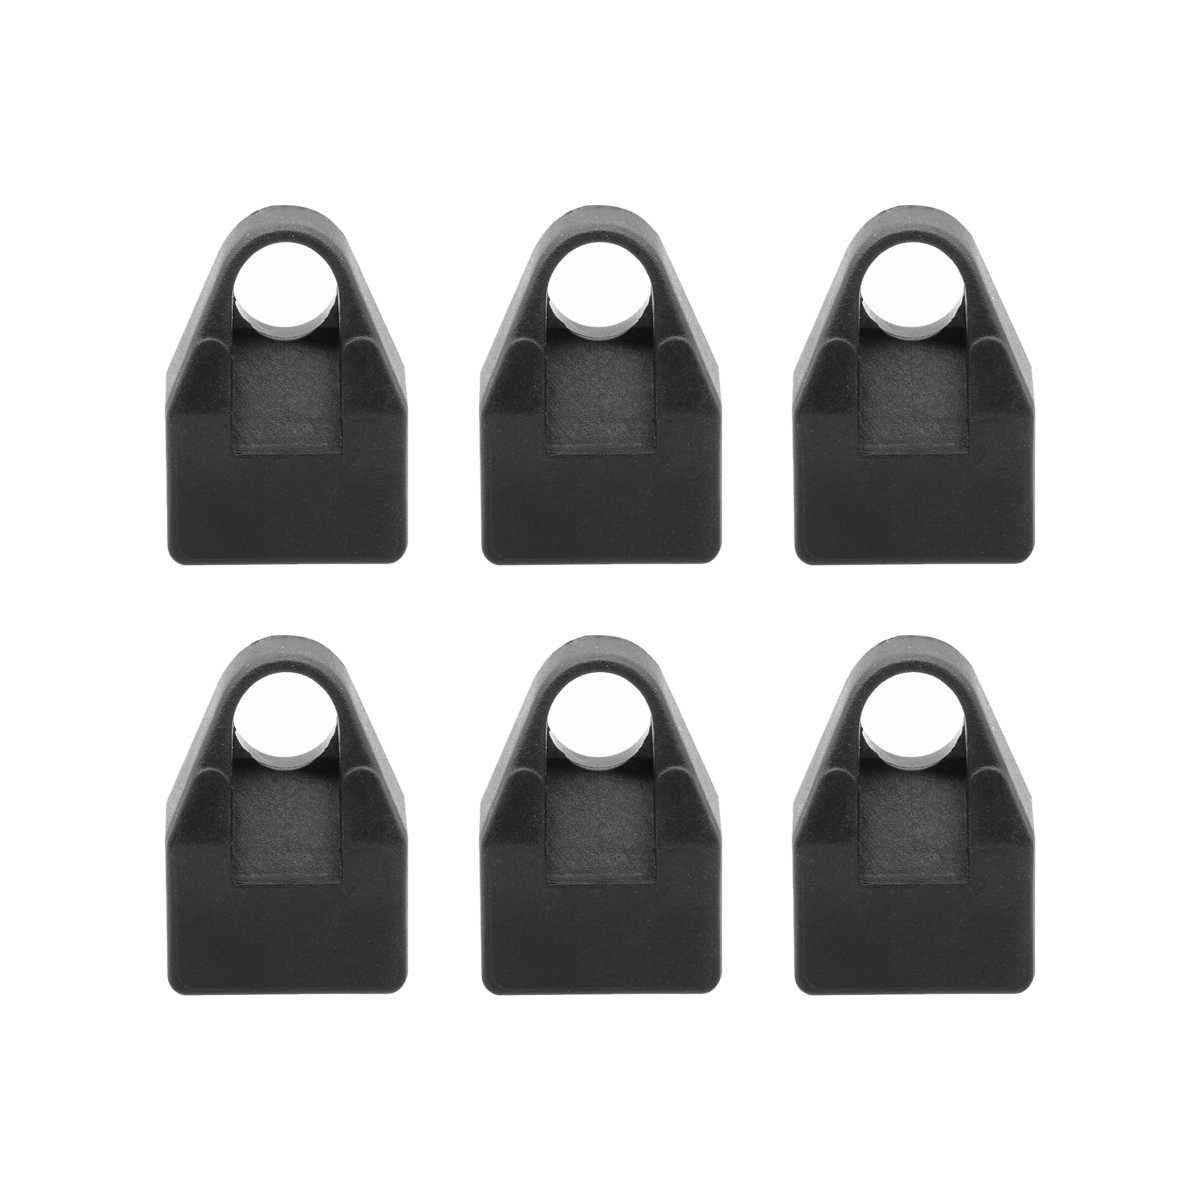 AK/ VALMET/ GALIL Recoil Buffer Packs -6pcs-No refunds or Exchanges-img-0